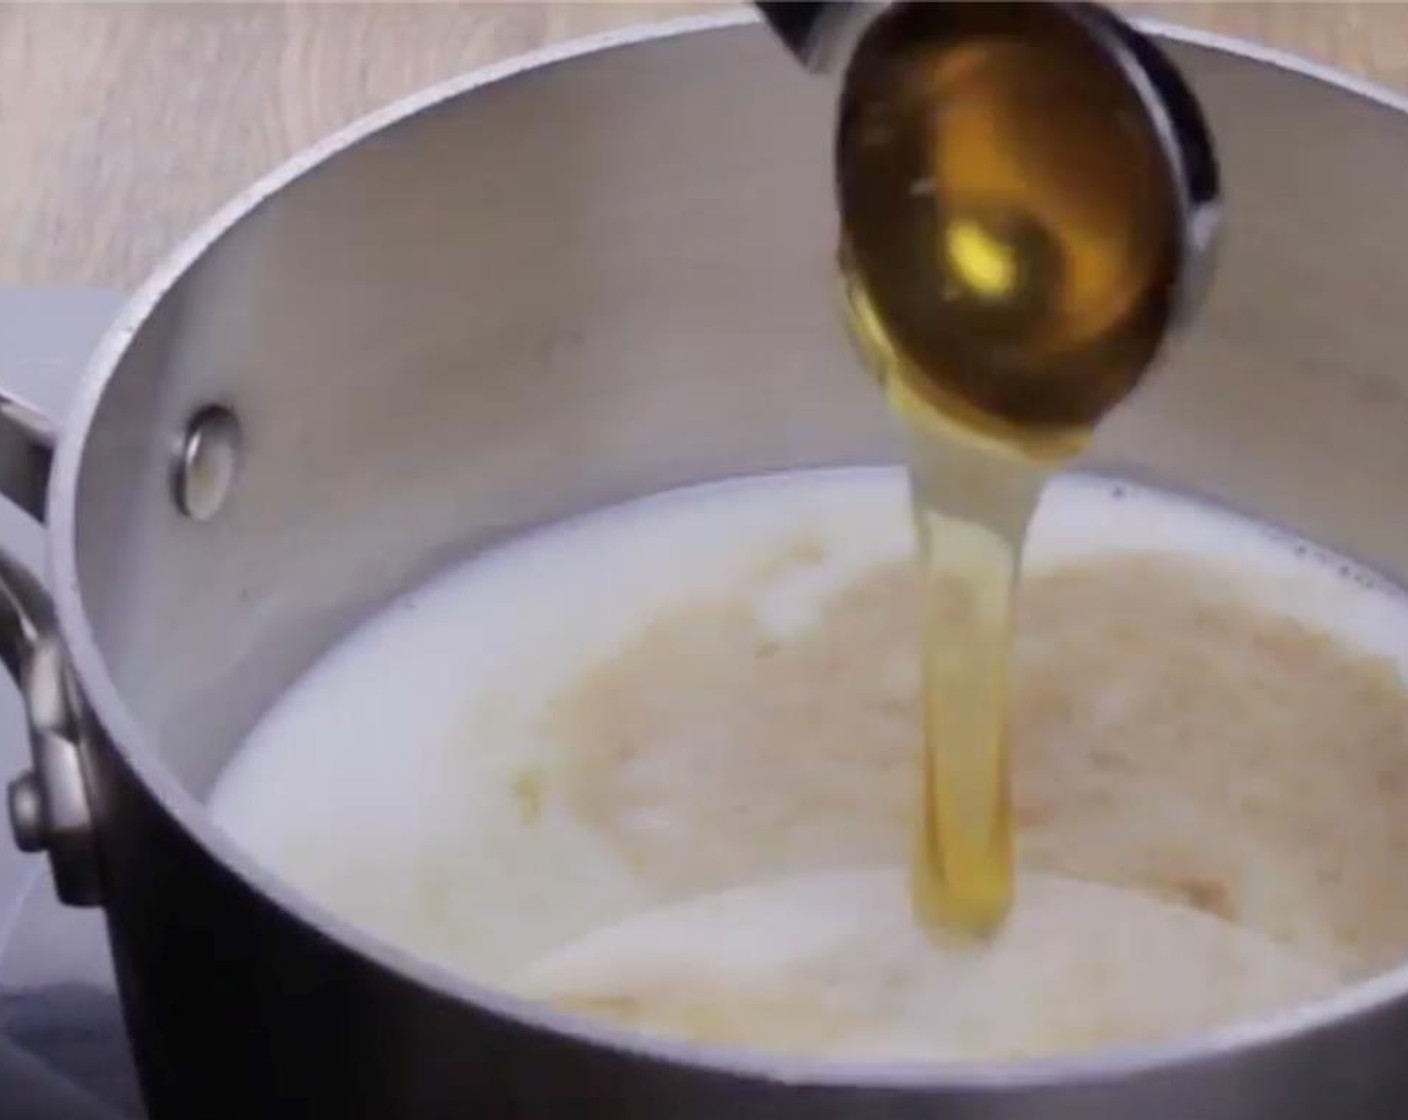 step 2 Heat a saucepan over medium-low heat, pour in 2% Reduced Fat Milk (1 cup), Unsalted Butter (2 Tbsp), Peanut Oil (2 Tbsp), Honey (1 Tbsp), and Vanilla Extract (1 tsp). Mix until the butter and honey have fully melted, then turn off the heat.